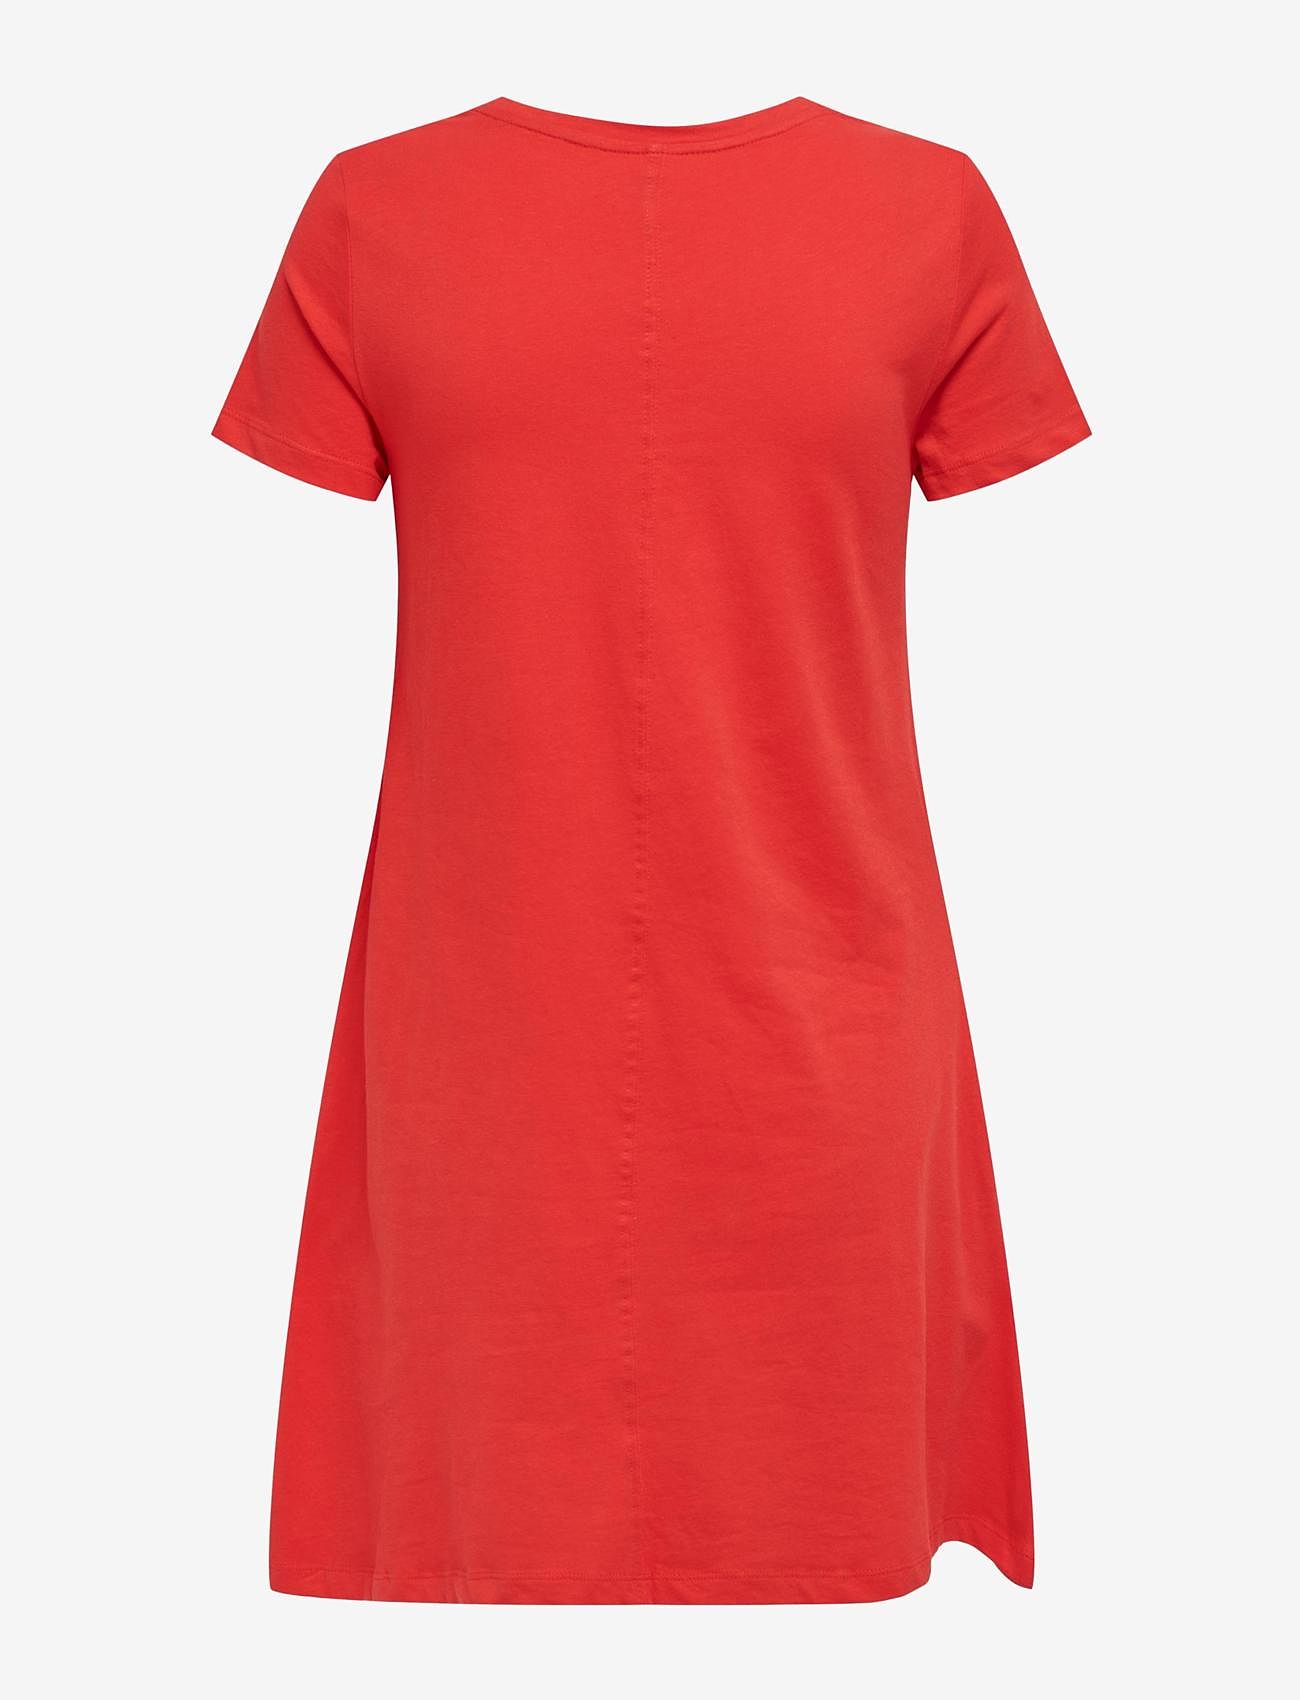 ONLY - ONLMAY LIFE S/S POCKET DRESS JRS - madalaimad hinnad - high risk red - 1